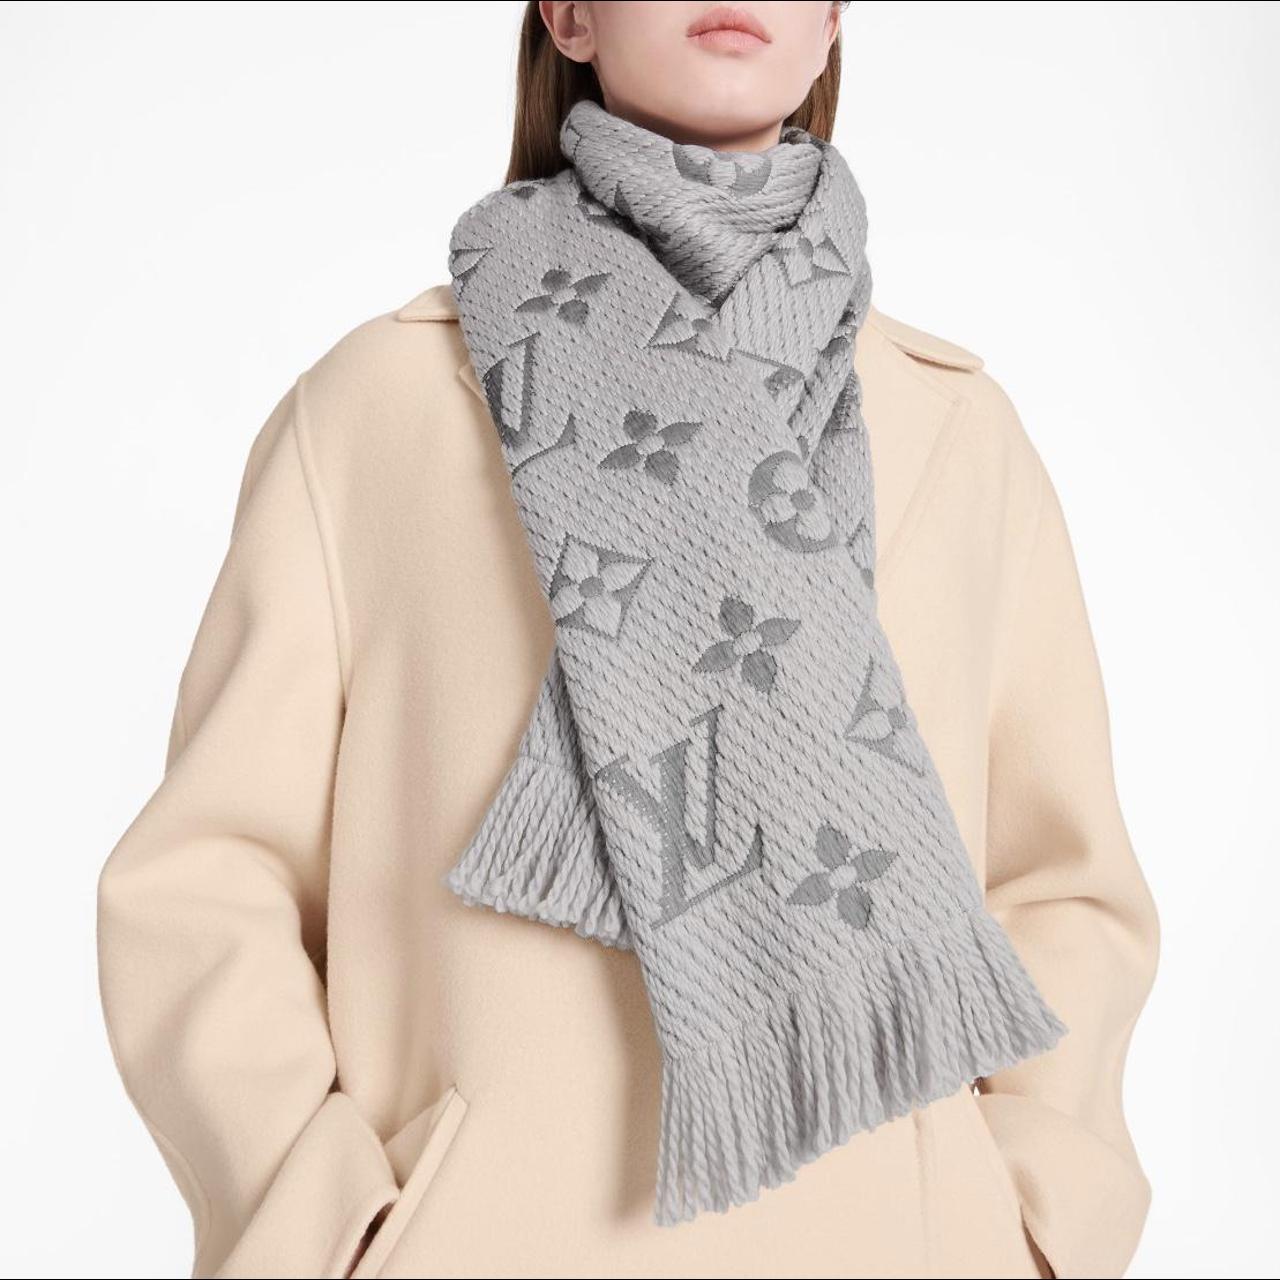 LV scarf and snowI've never seen either one.